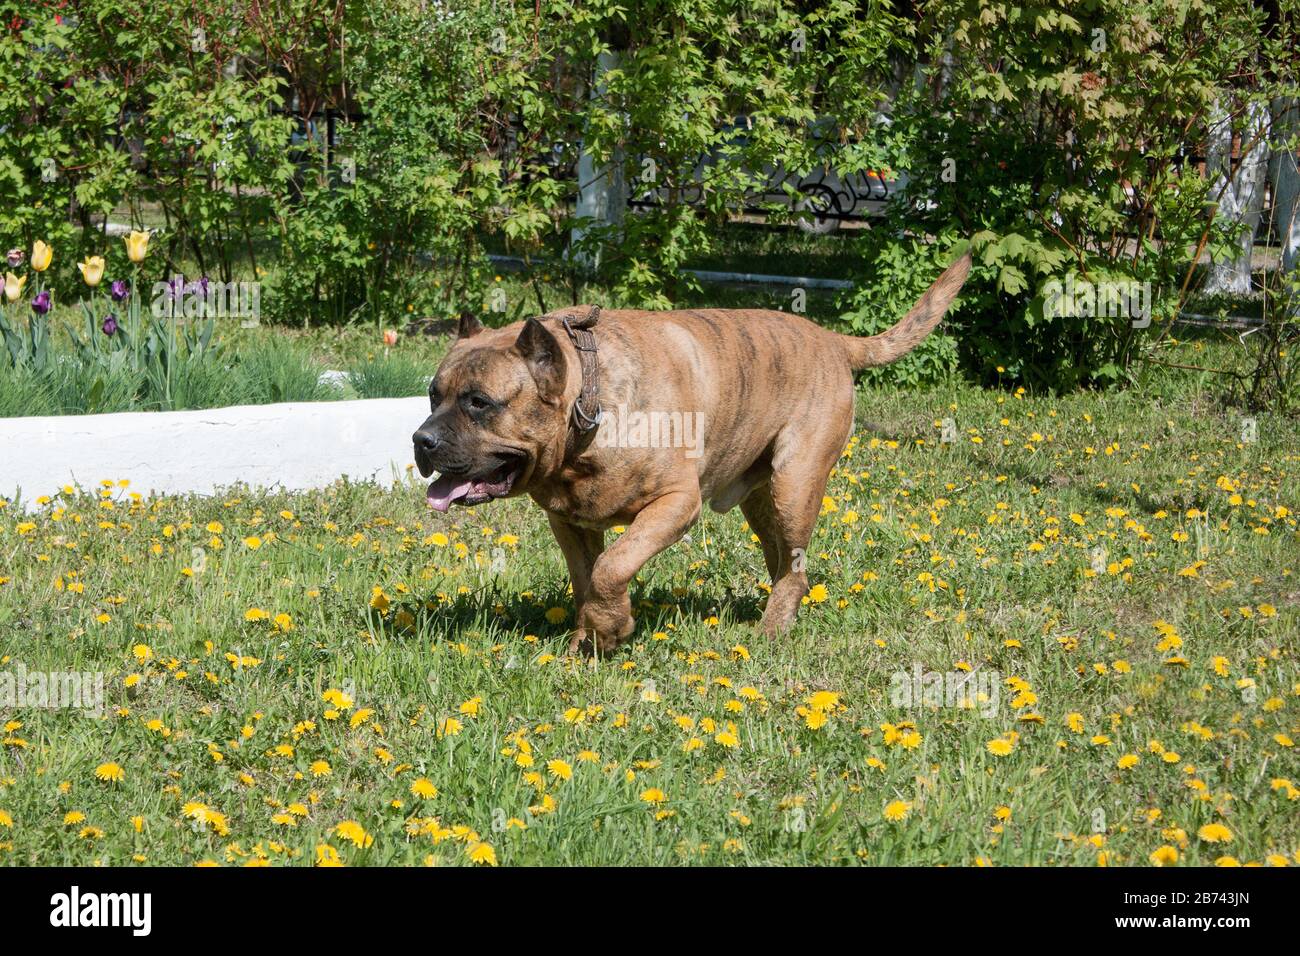 Canary mastiff is walking on a green meadow. Canarian molosser or dogo canario. Pet animals. Stock Photo